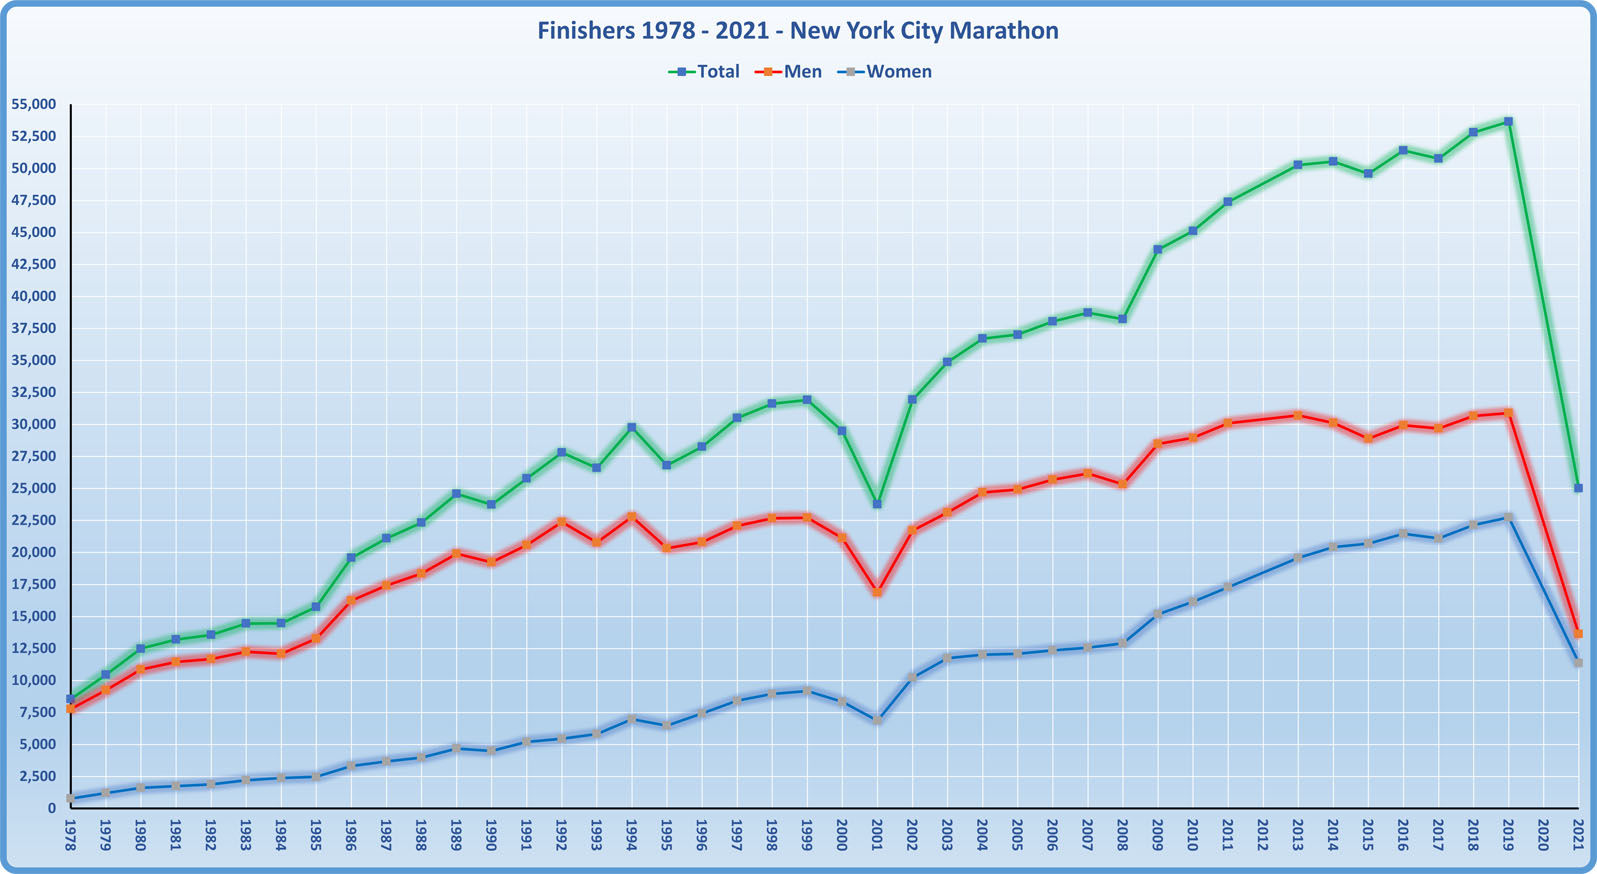 Number of finishers 1978 - 2021